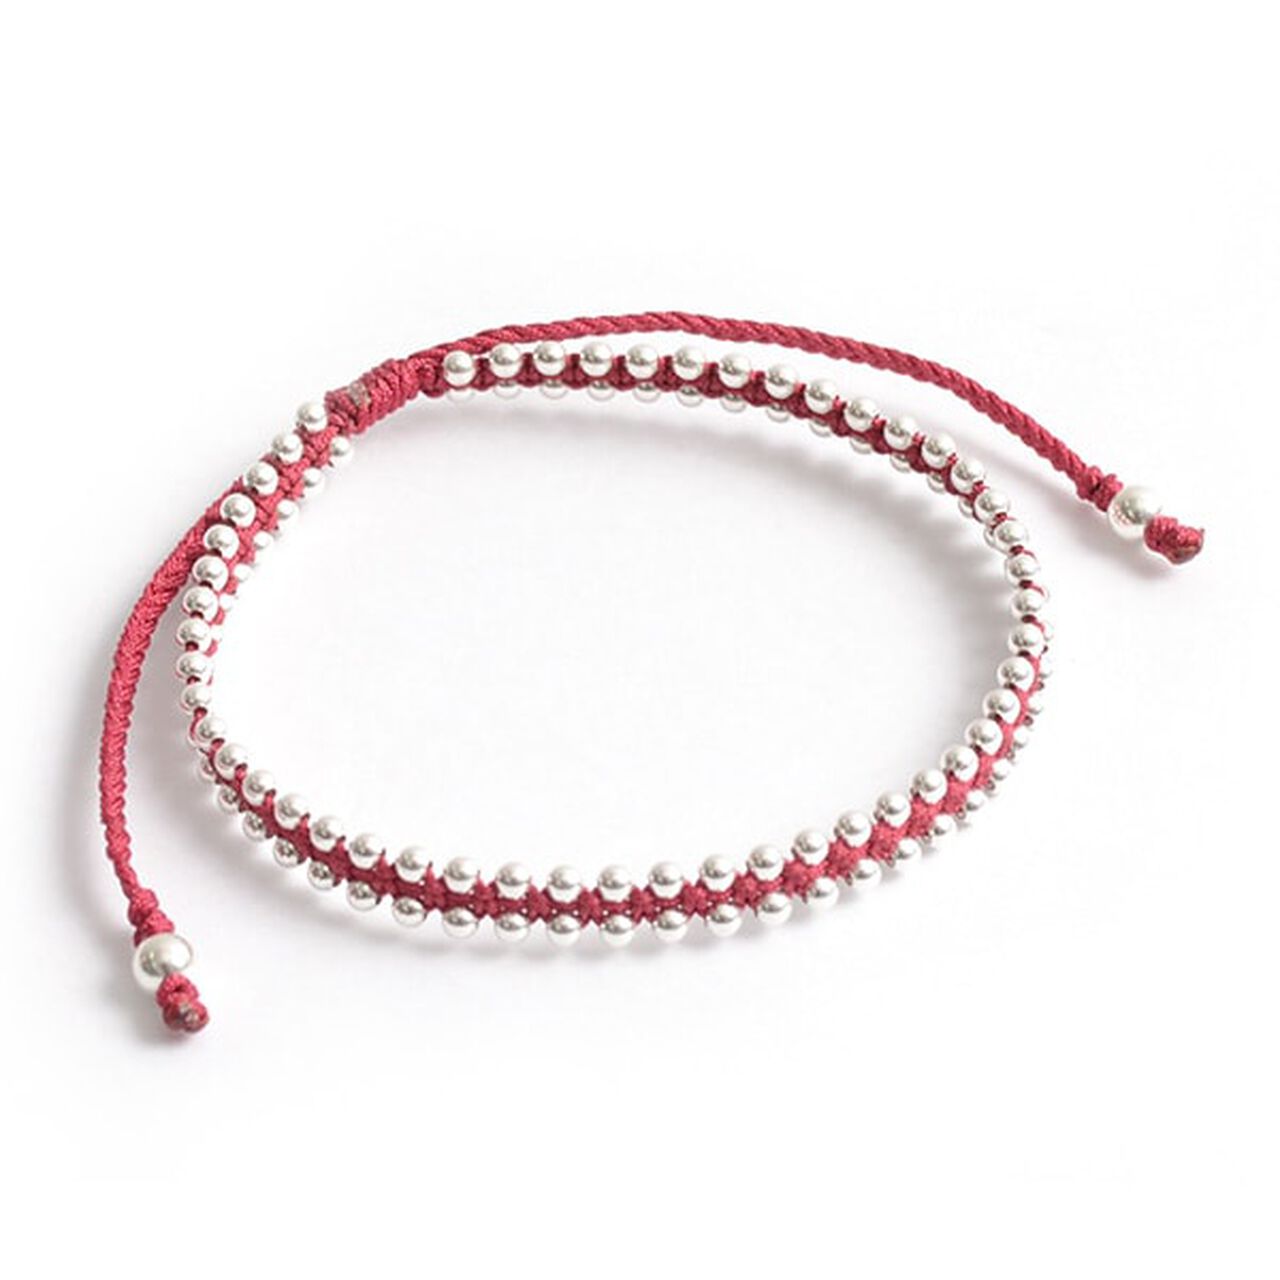 Silver Ball Beads Duo Bracelet,DarkRed, large image number 0